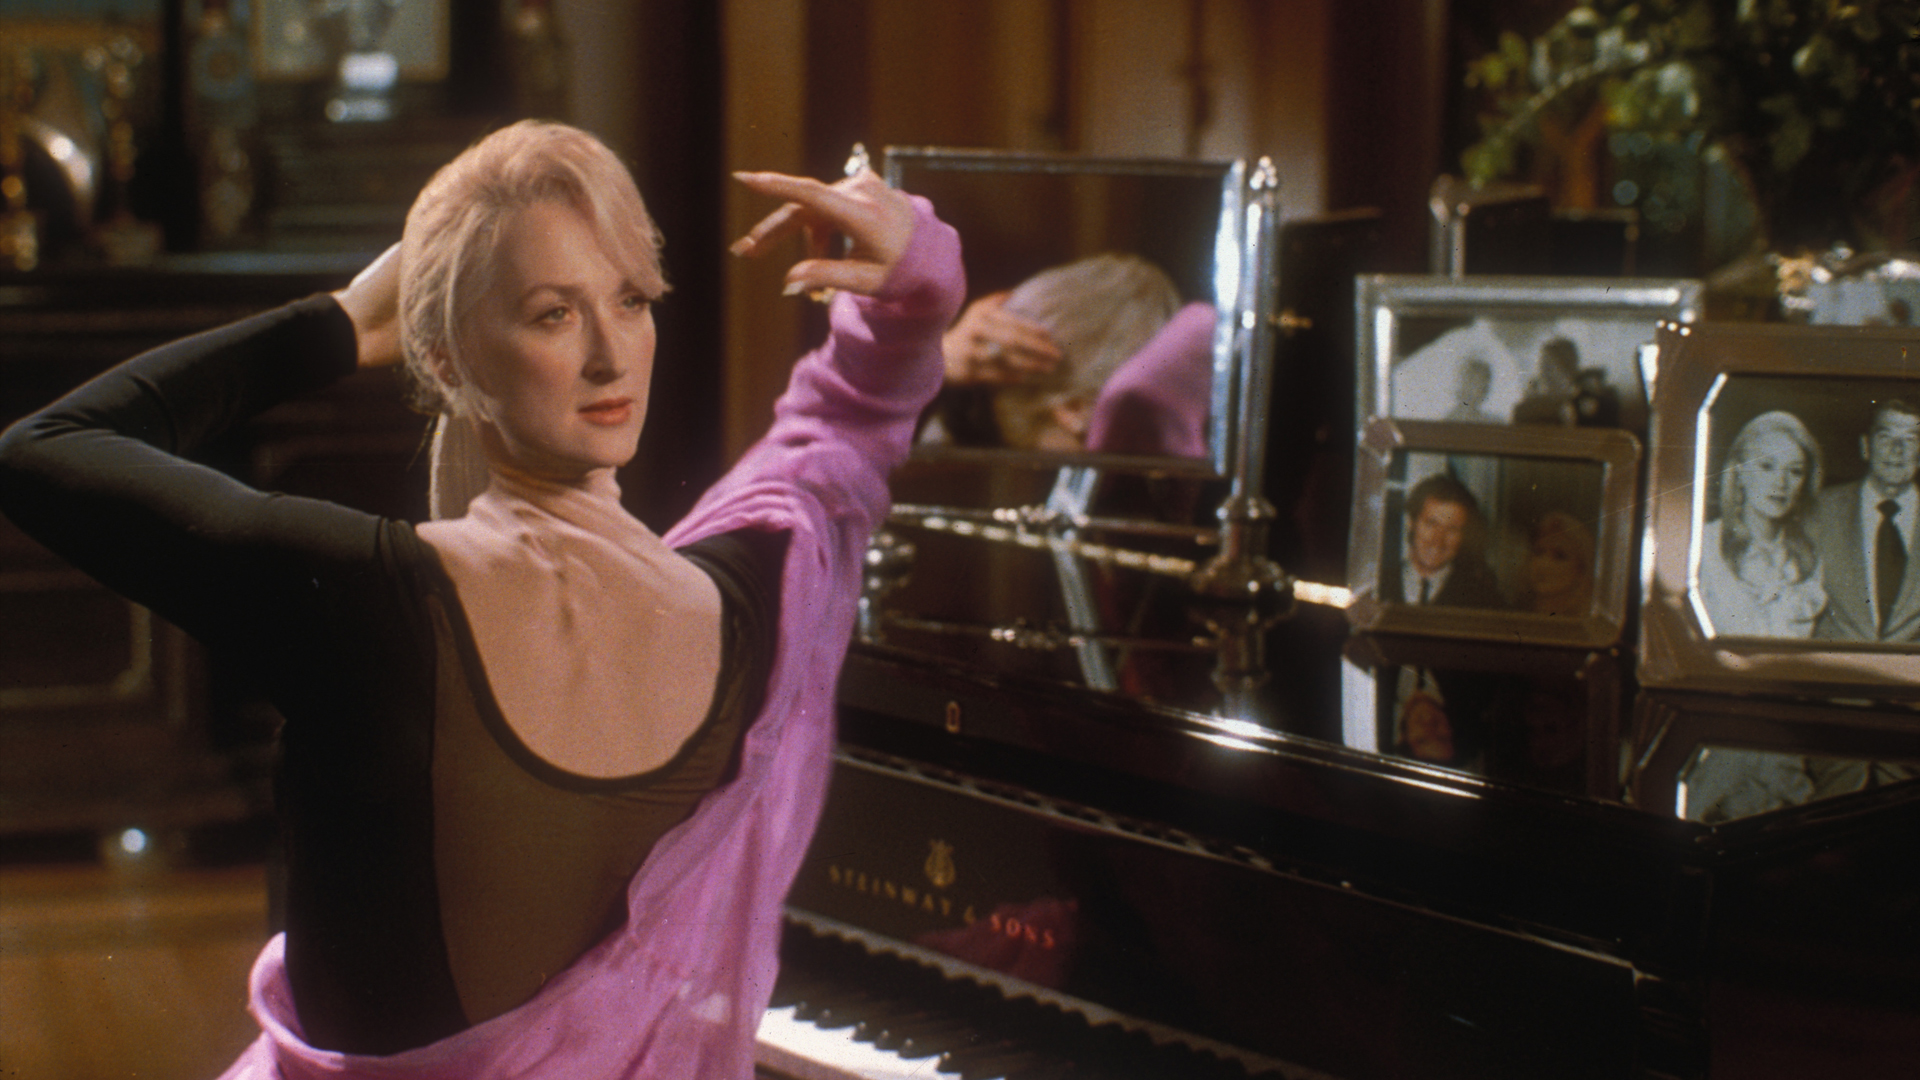 Madeline Ashton (Meryl Streep) gets her neck twisted with a little help from ILM in the Academy Award®-winning Death Becomes Her (1992). © Universal Pictures. All Rights Reserved.